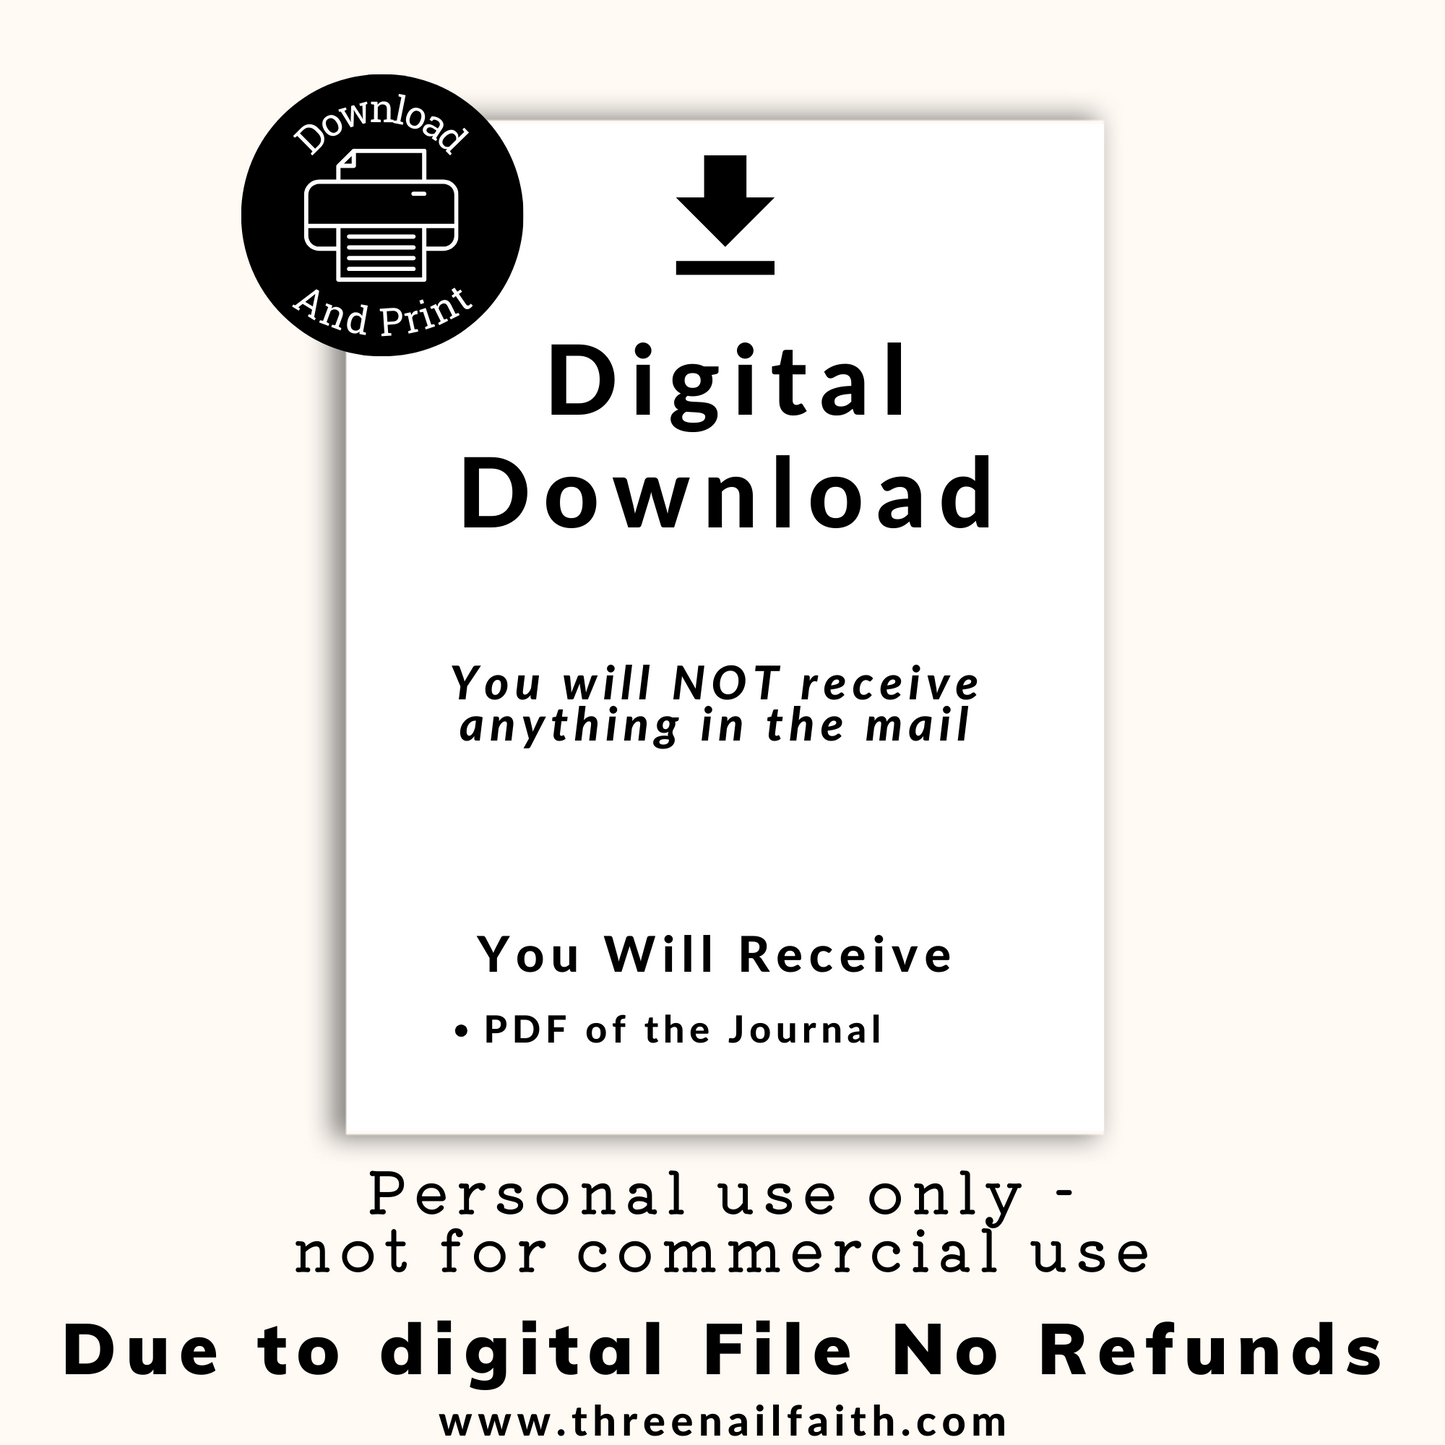 This is a digital download, nothing will be shipped to you. you will receive a PDF copy of the journal. Due to digital file no refunds, this file is for personal use only.